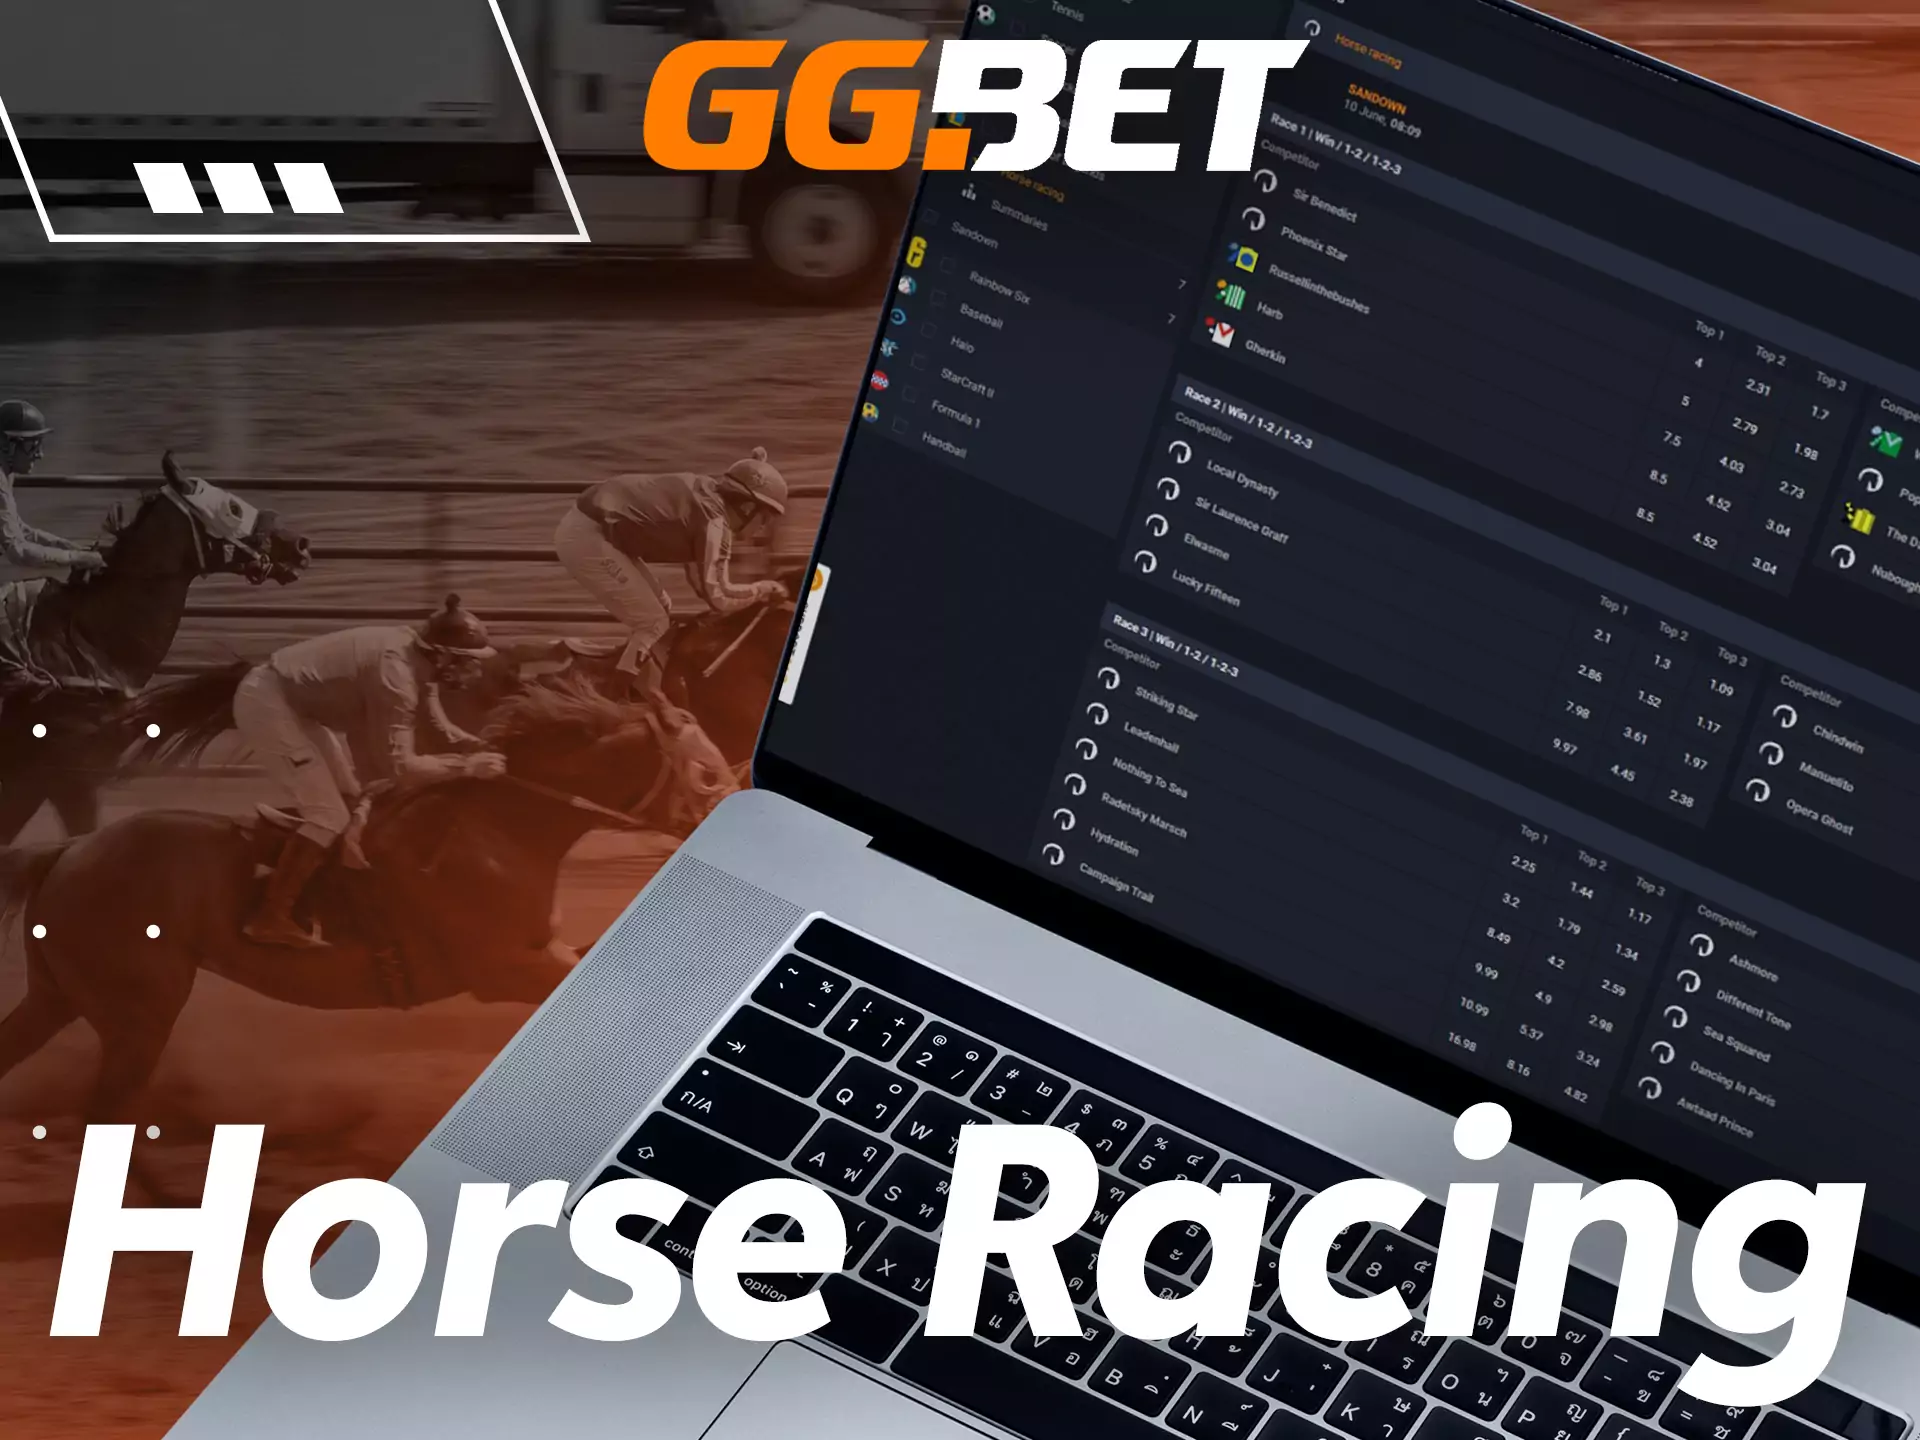 In the GGBet sportsbook, horse racing has lots of available events.